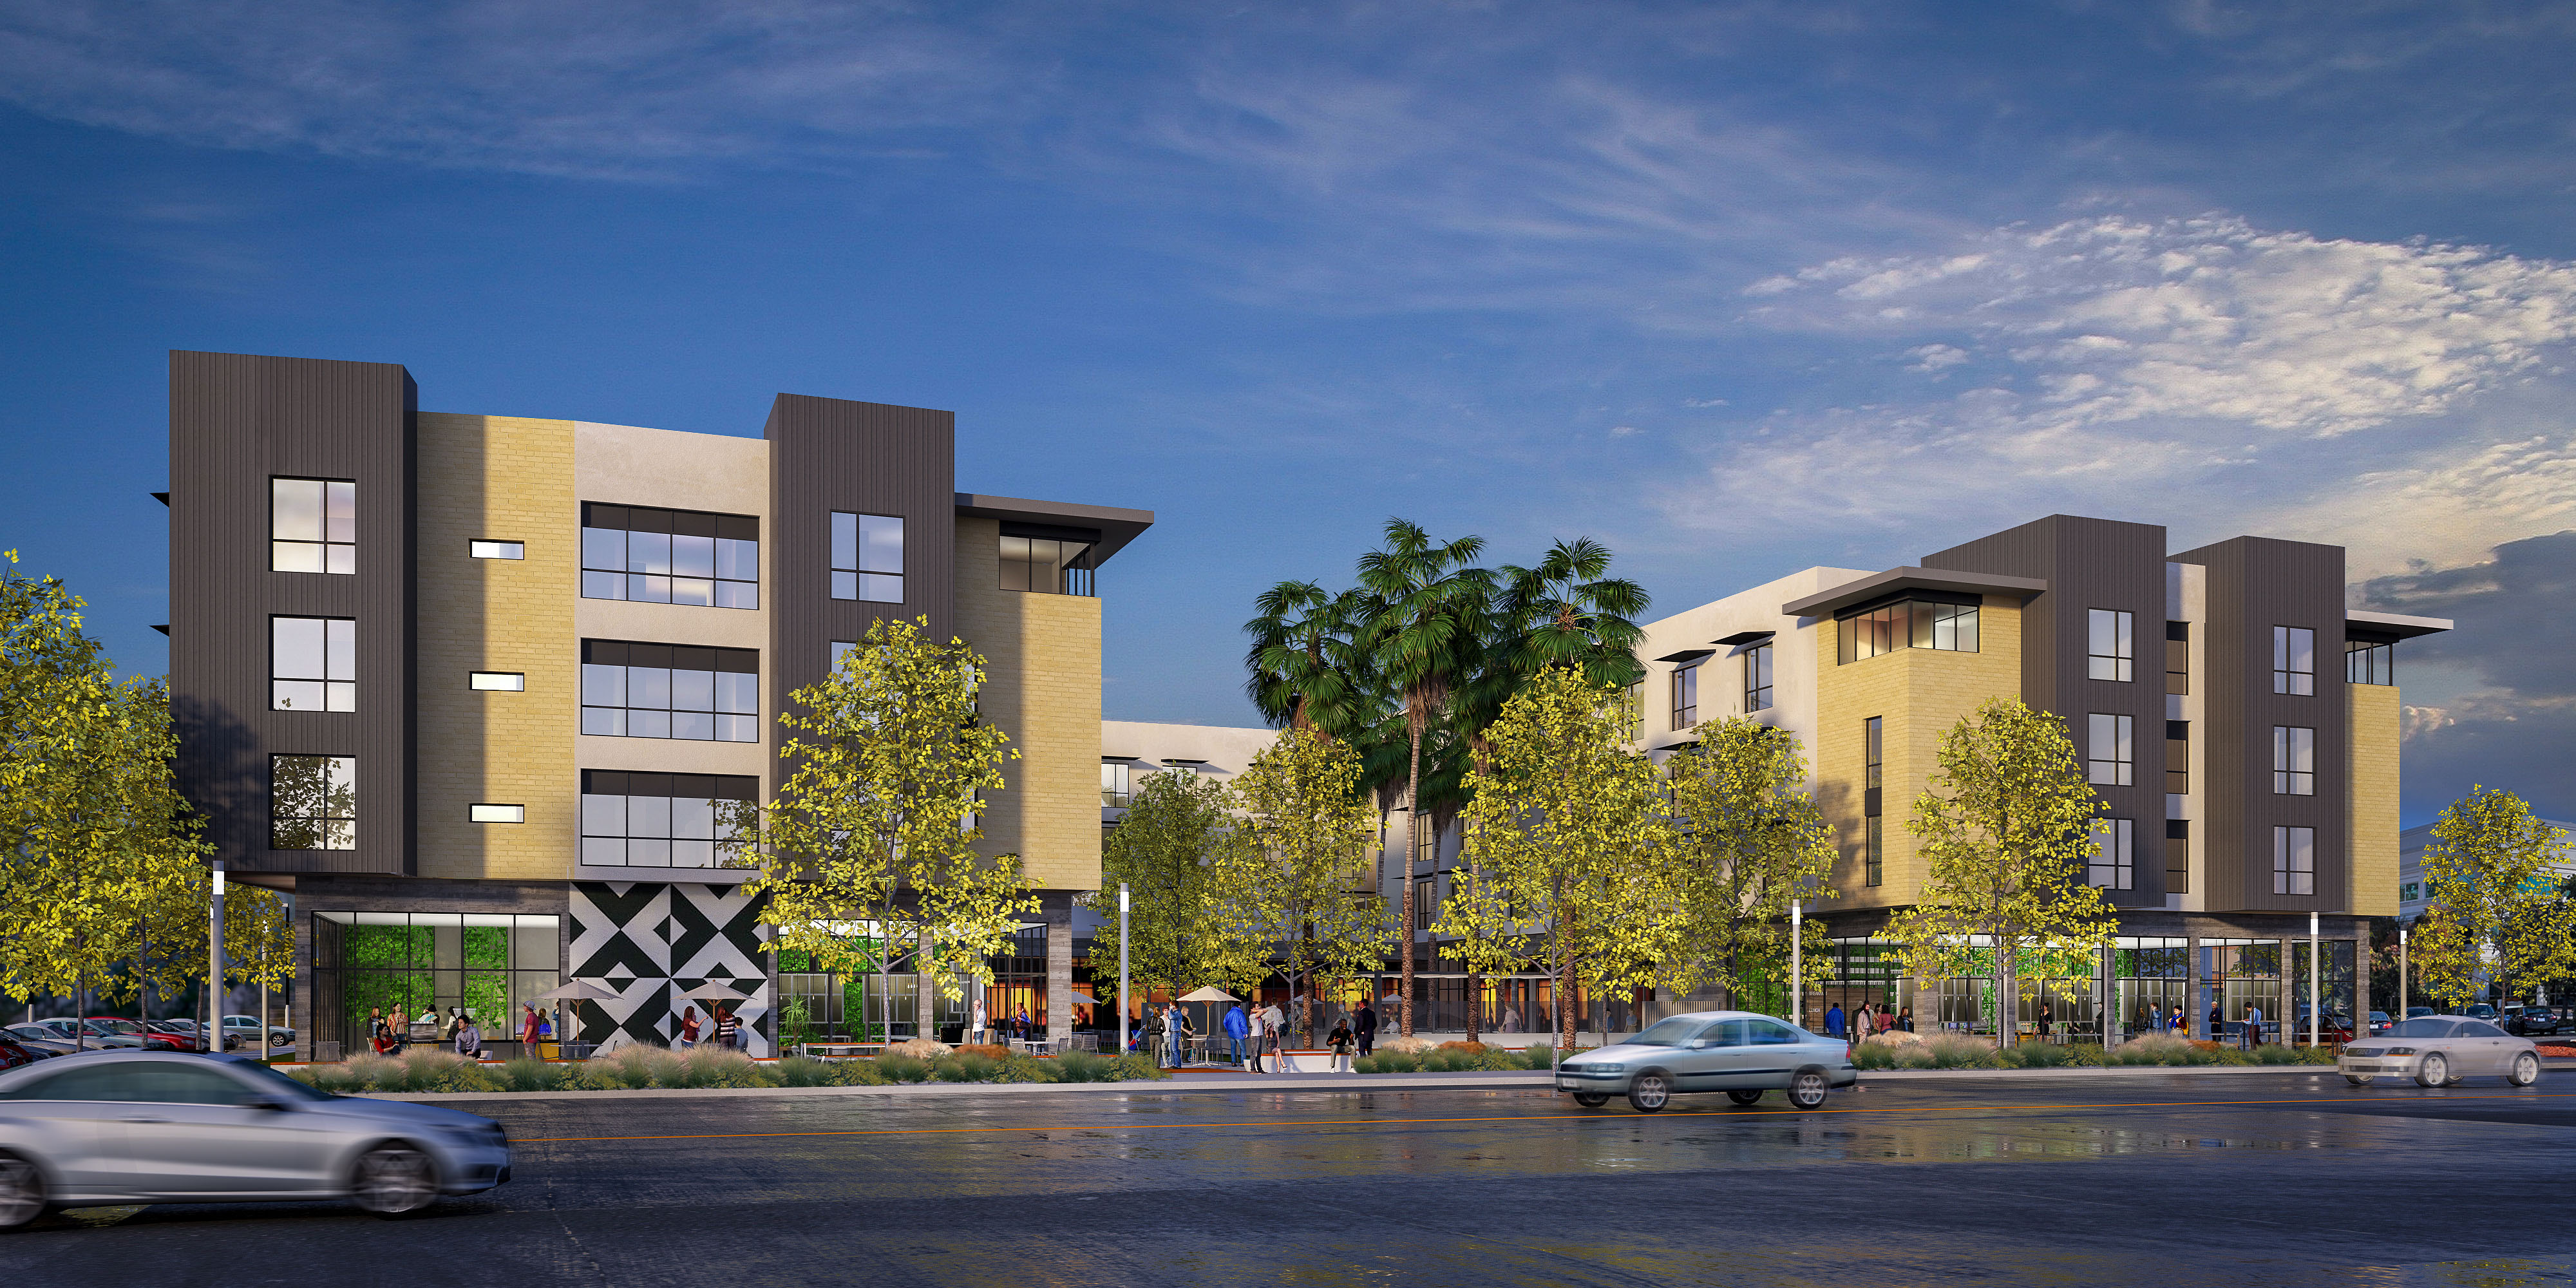 Image of Blossom Valley Senior Apartments